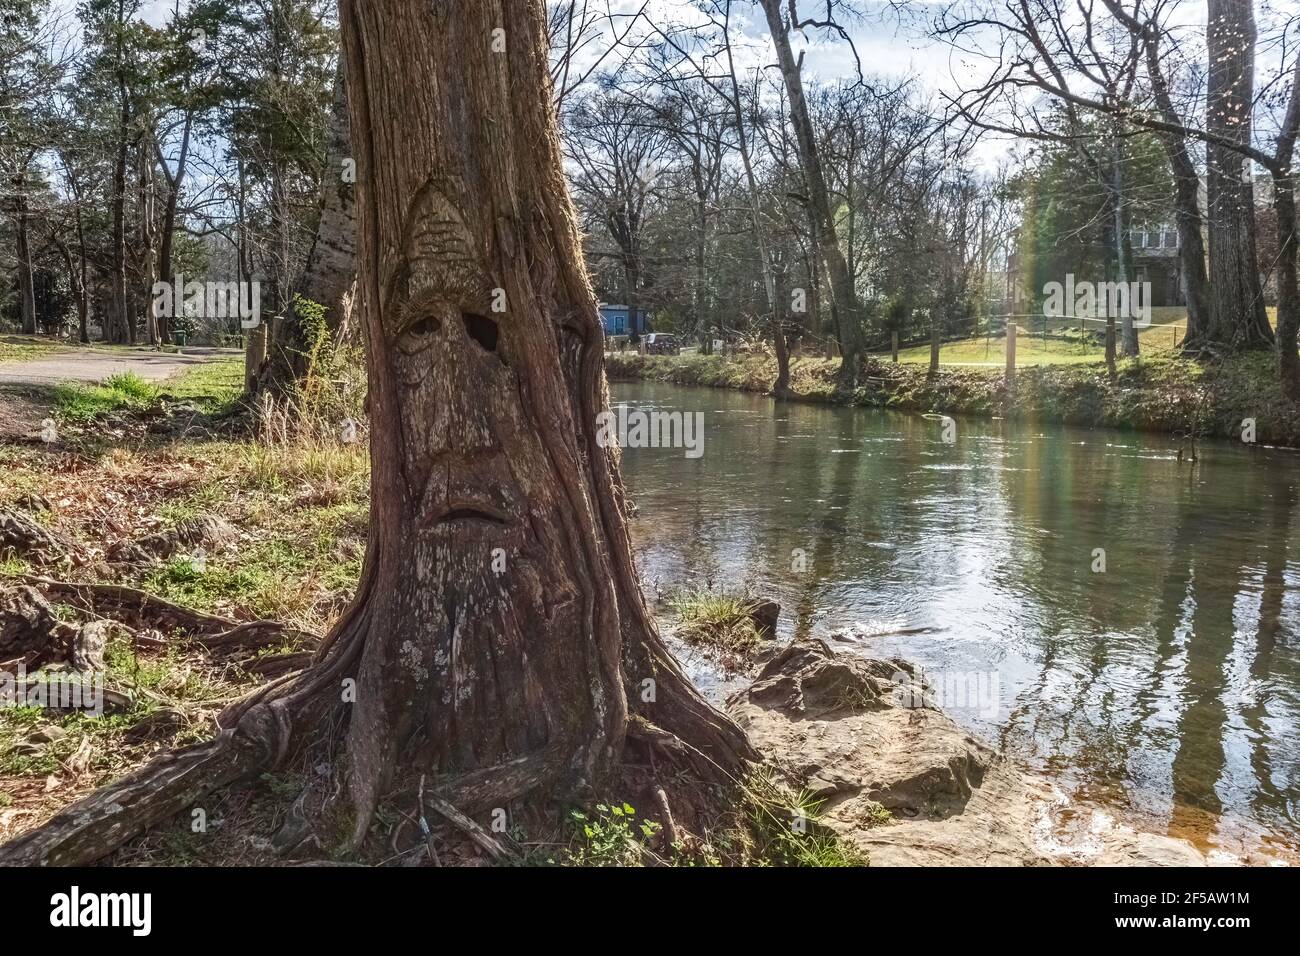 Montevallo, Alabama/USA-March 12: One of Orr Park's woodcarved faces by artist Tim Tingle in a tree next to Shoal Creek. Stock Photo